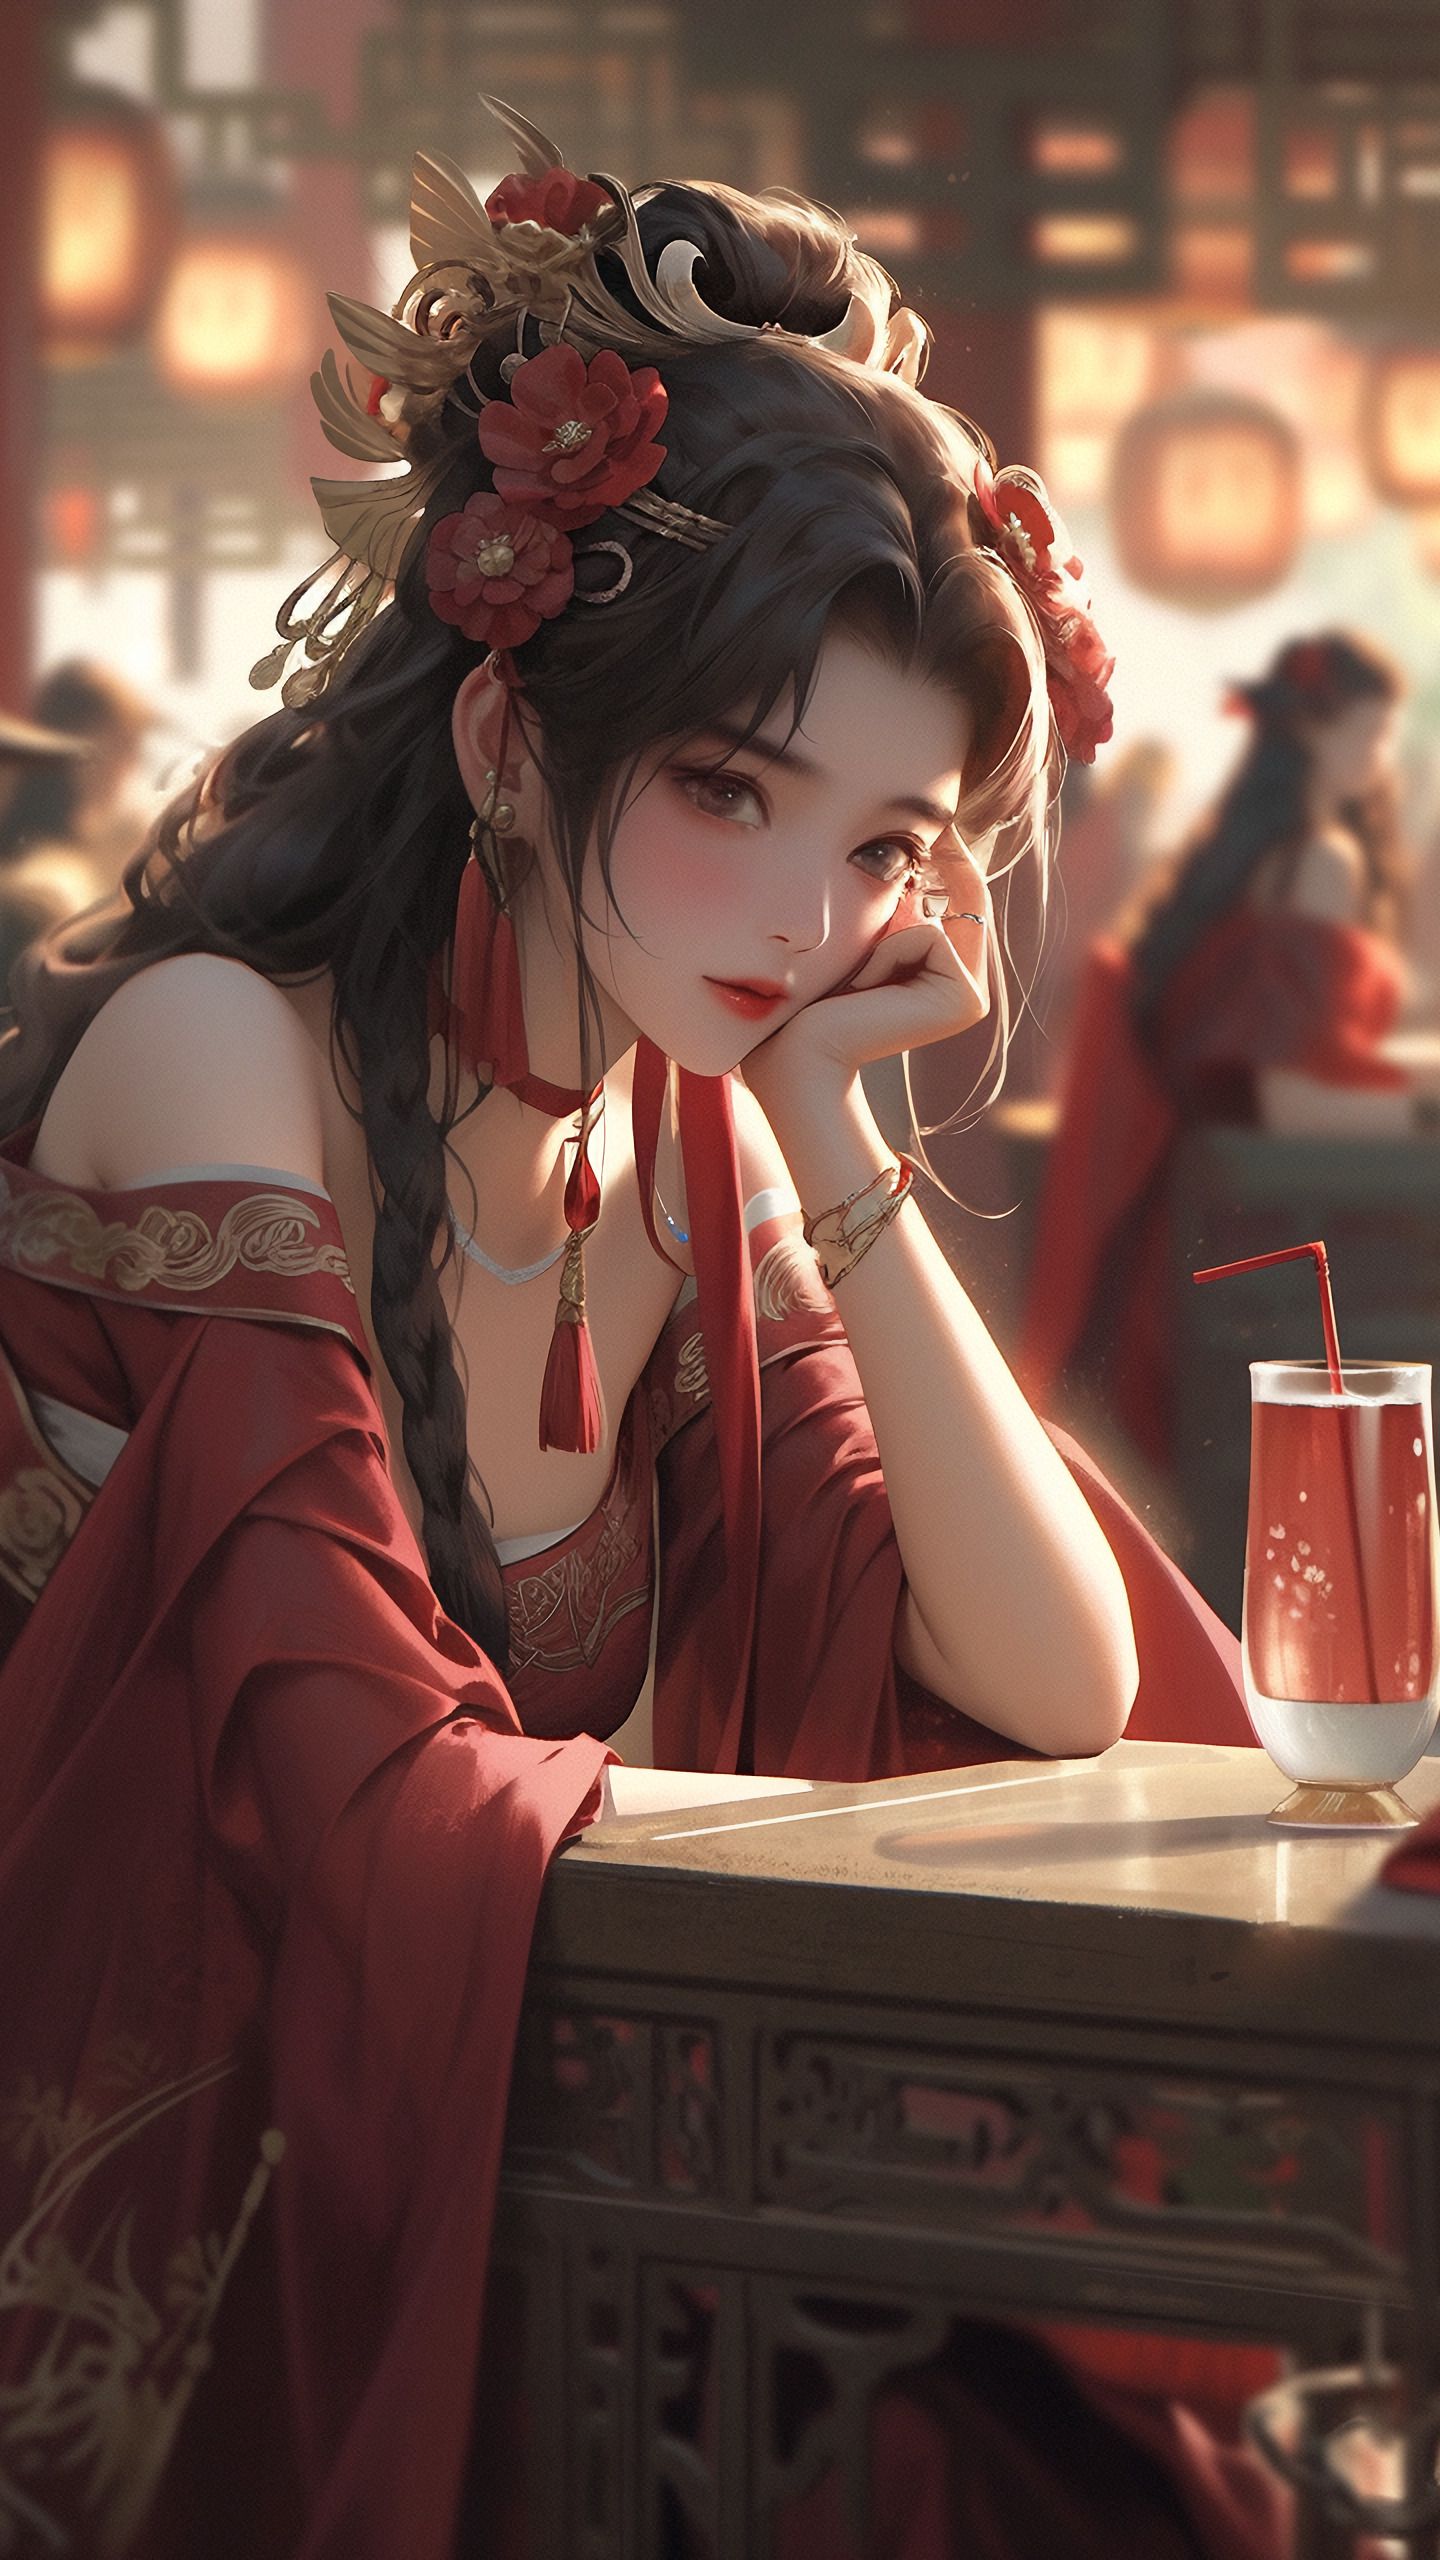 Download wallpaper 1440x2560 girl, jewelry, dress, anime, red qhd ...